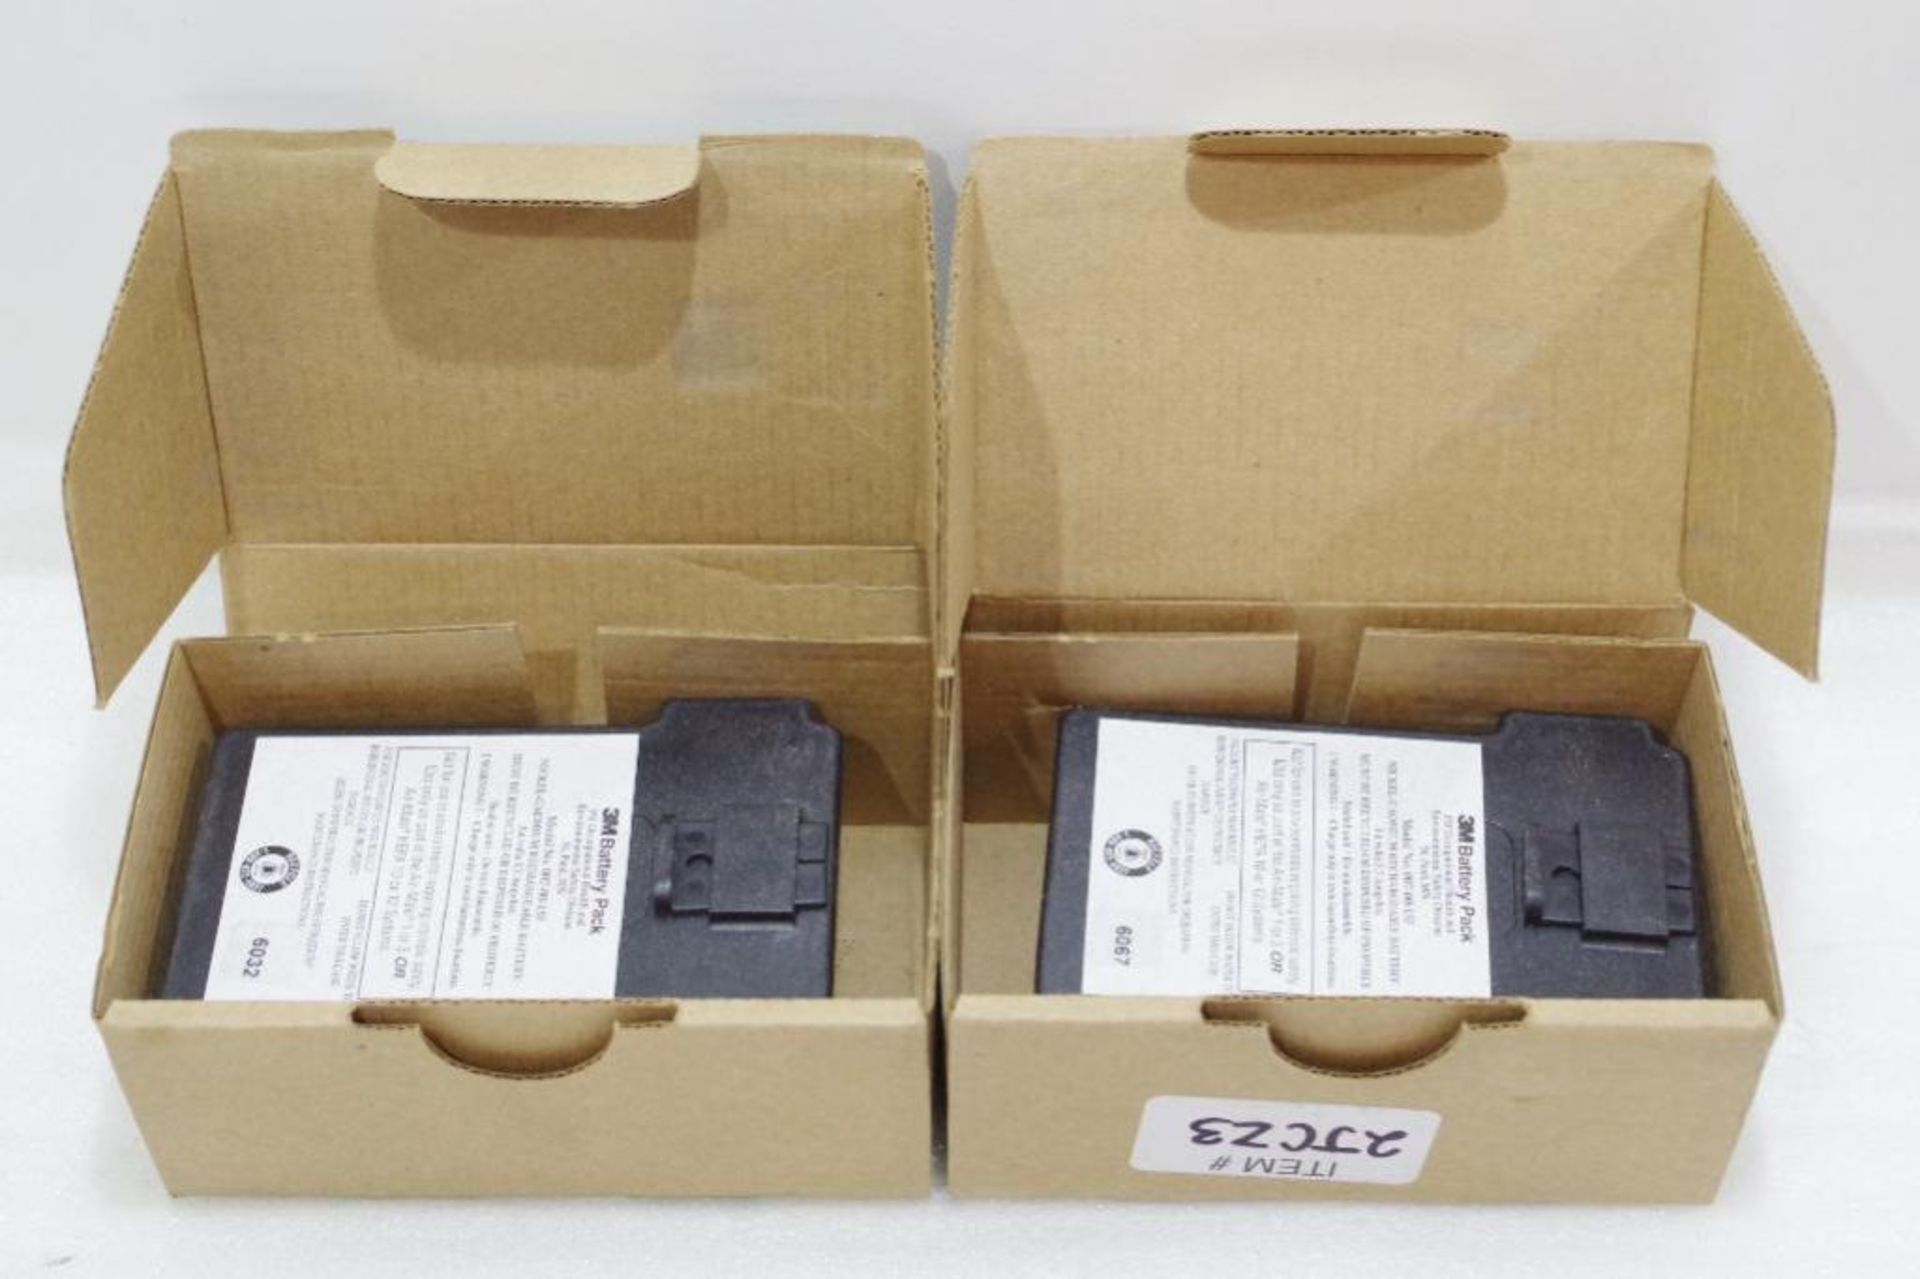 (2) 3M Battery Packs, Nickel Cadmium M/N 007-00-15R01 (For use w/ Air Mate Air Purifying Respirator) - Image 2 of 4